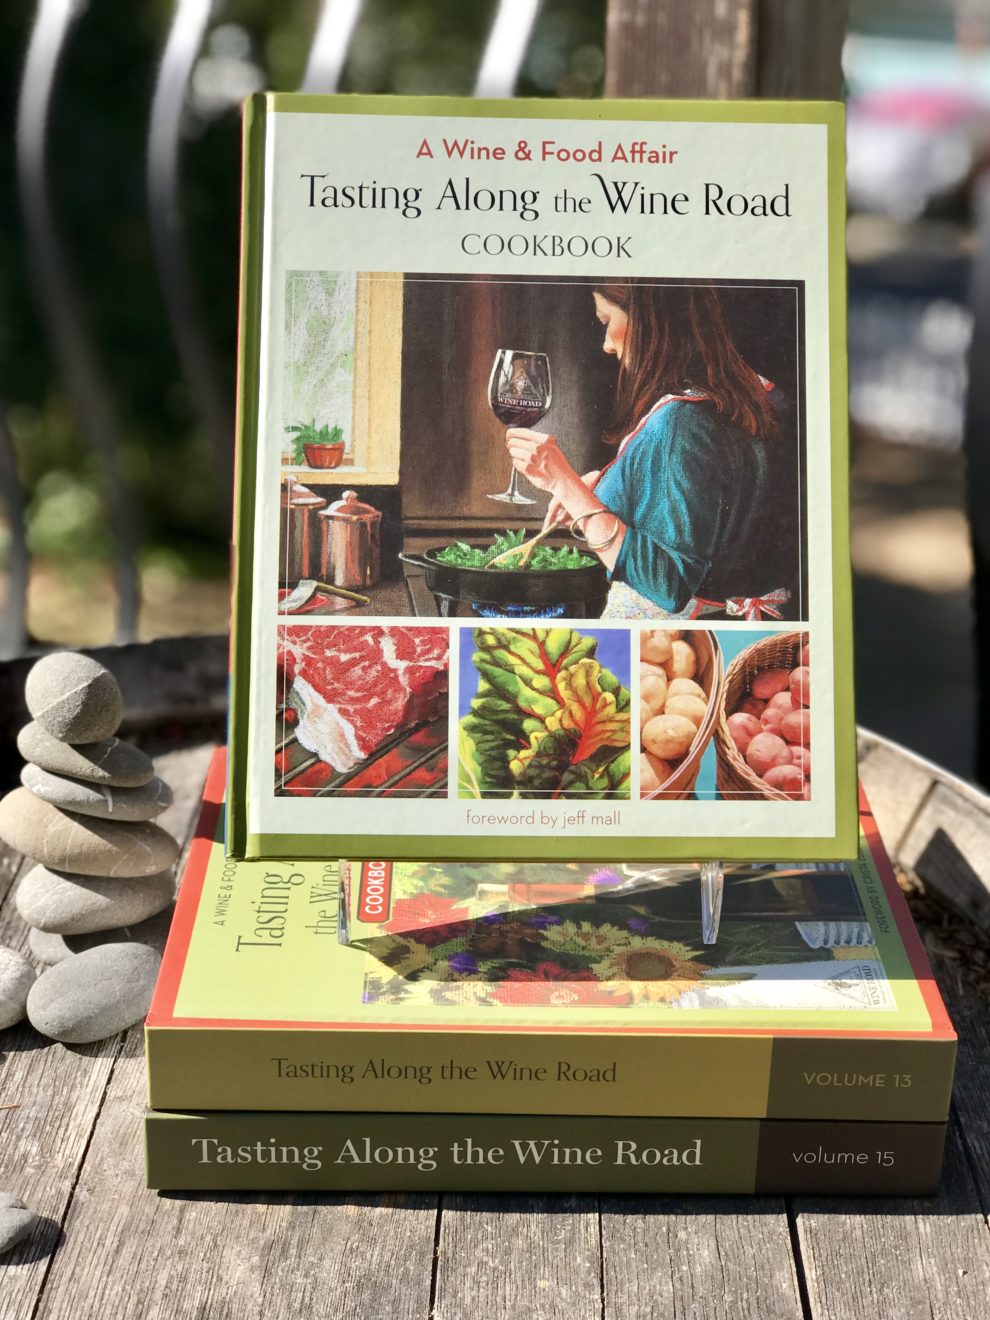 A Wine and Food Affair Tasting Along the Wine Road Cookbook foreword by Jeff Mall Volume 14 attractively displayed on a barrel